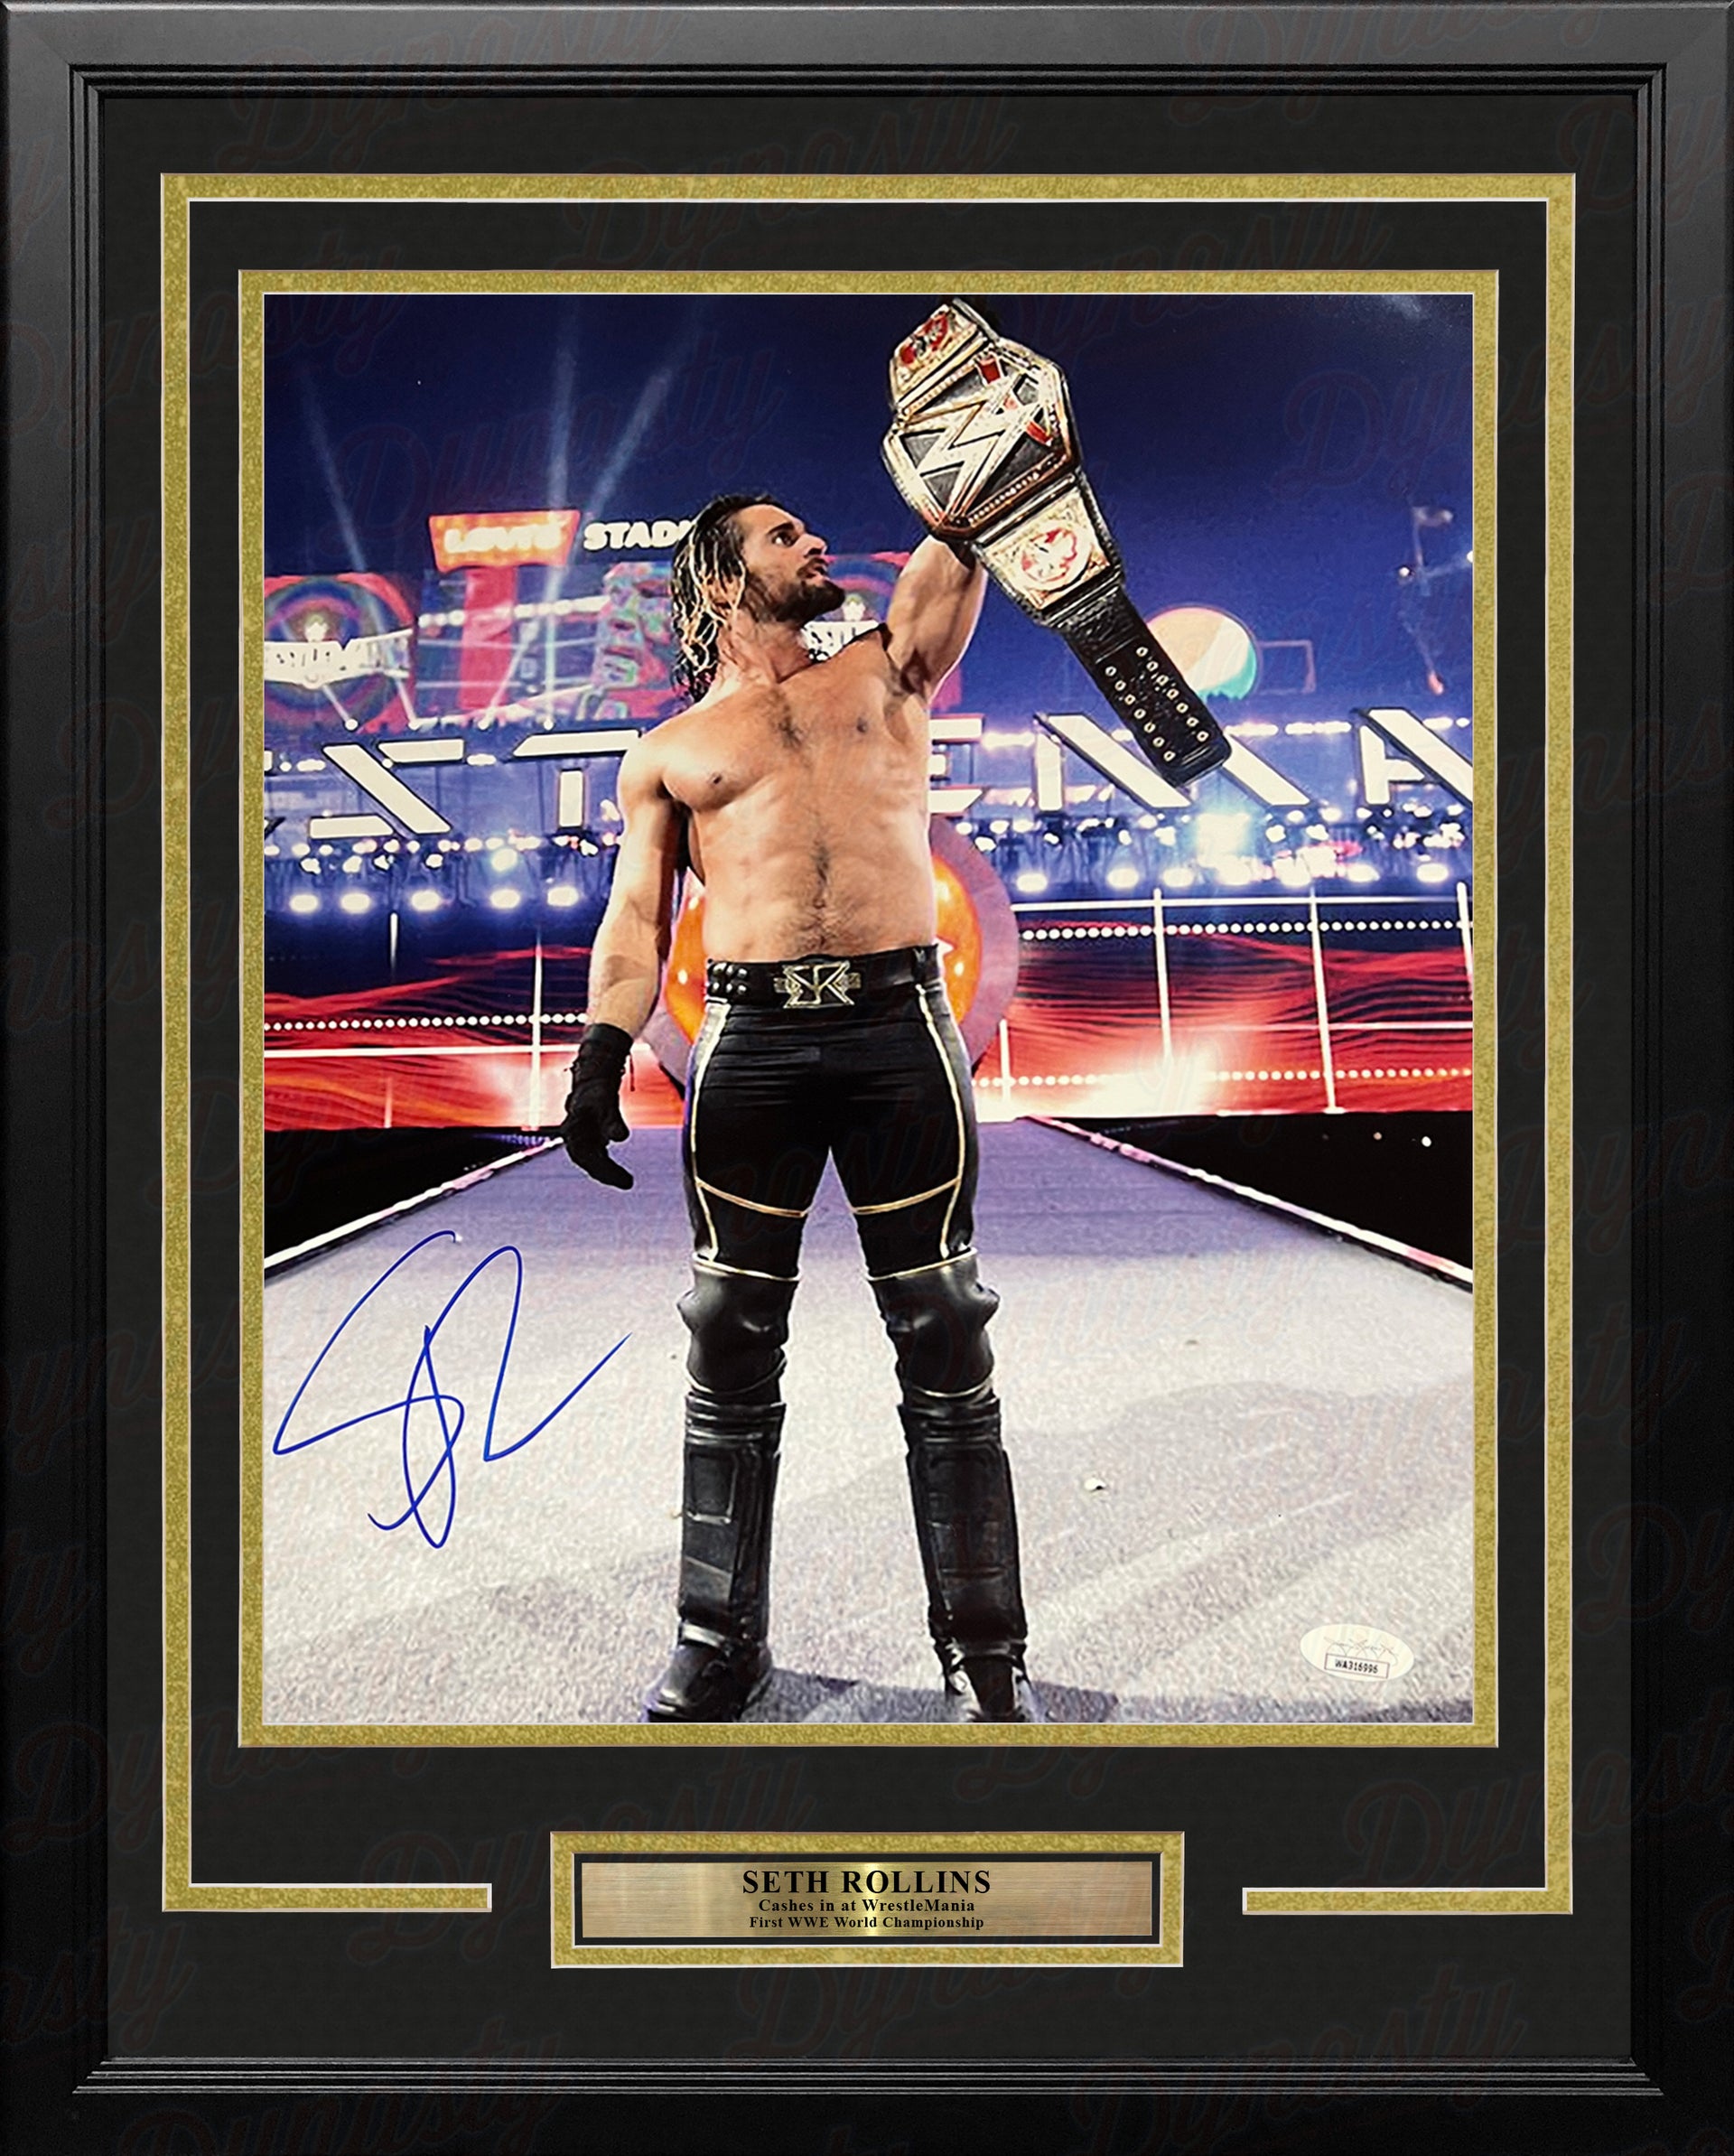 Seth Rollins Money-in-the-Bank Championship Cash-in Autographed Framed WWE Wrestling Photo - Dynasty Sports & Framing 